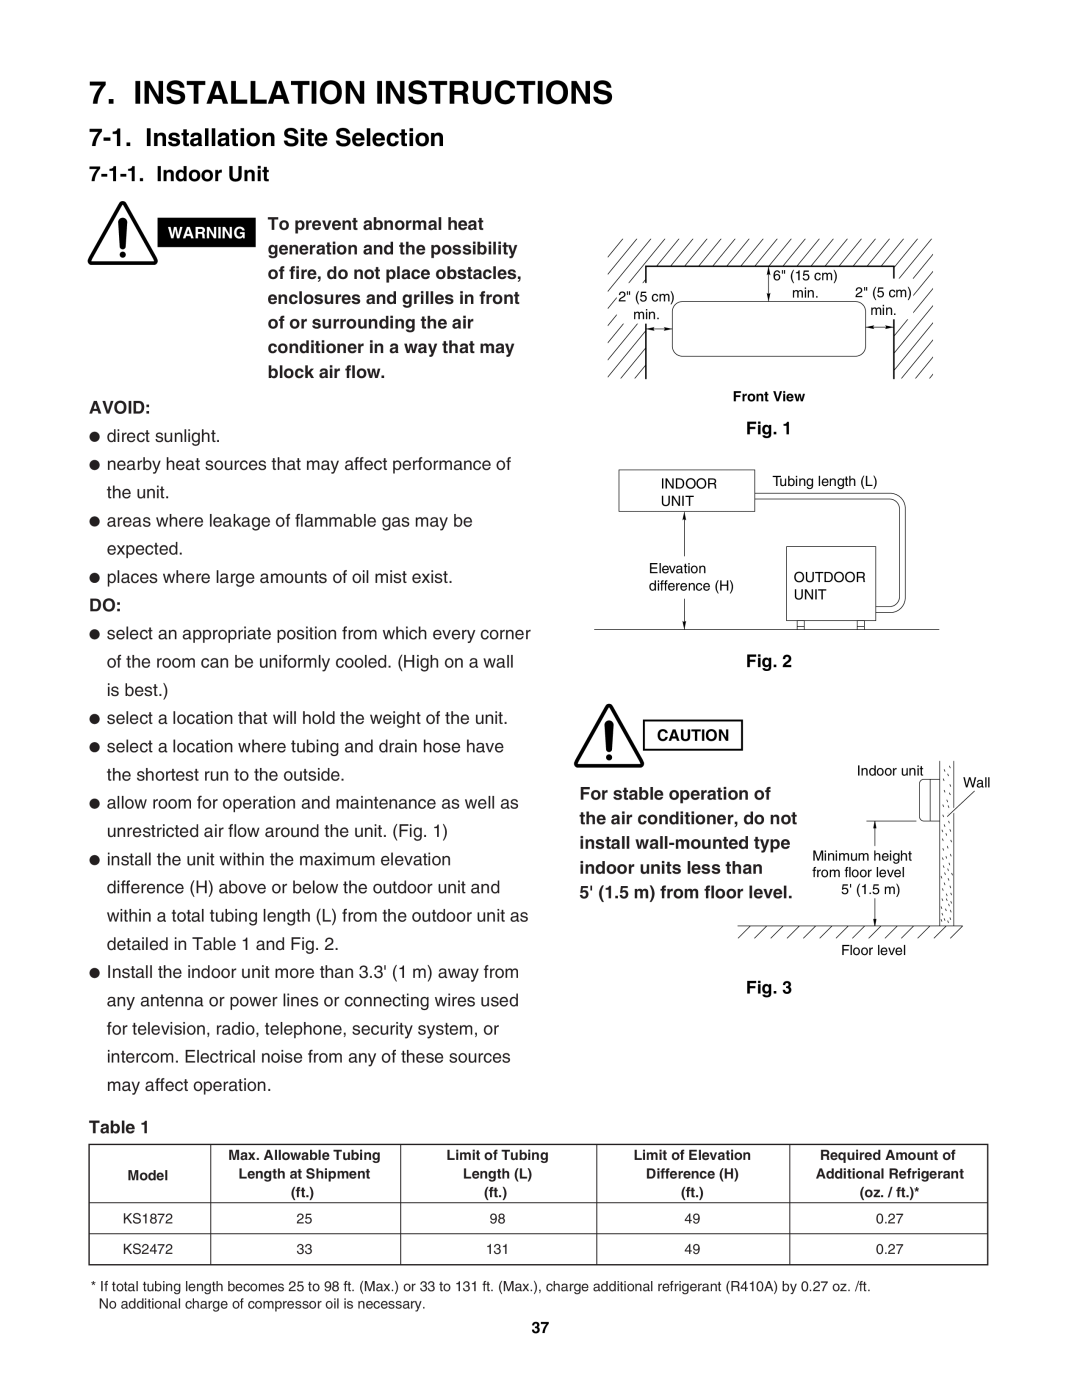 Sanyo C1872 Installation Instructions, Installation Site Selection, Indoor Unit, To prevent abnormal heat, block air flow 